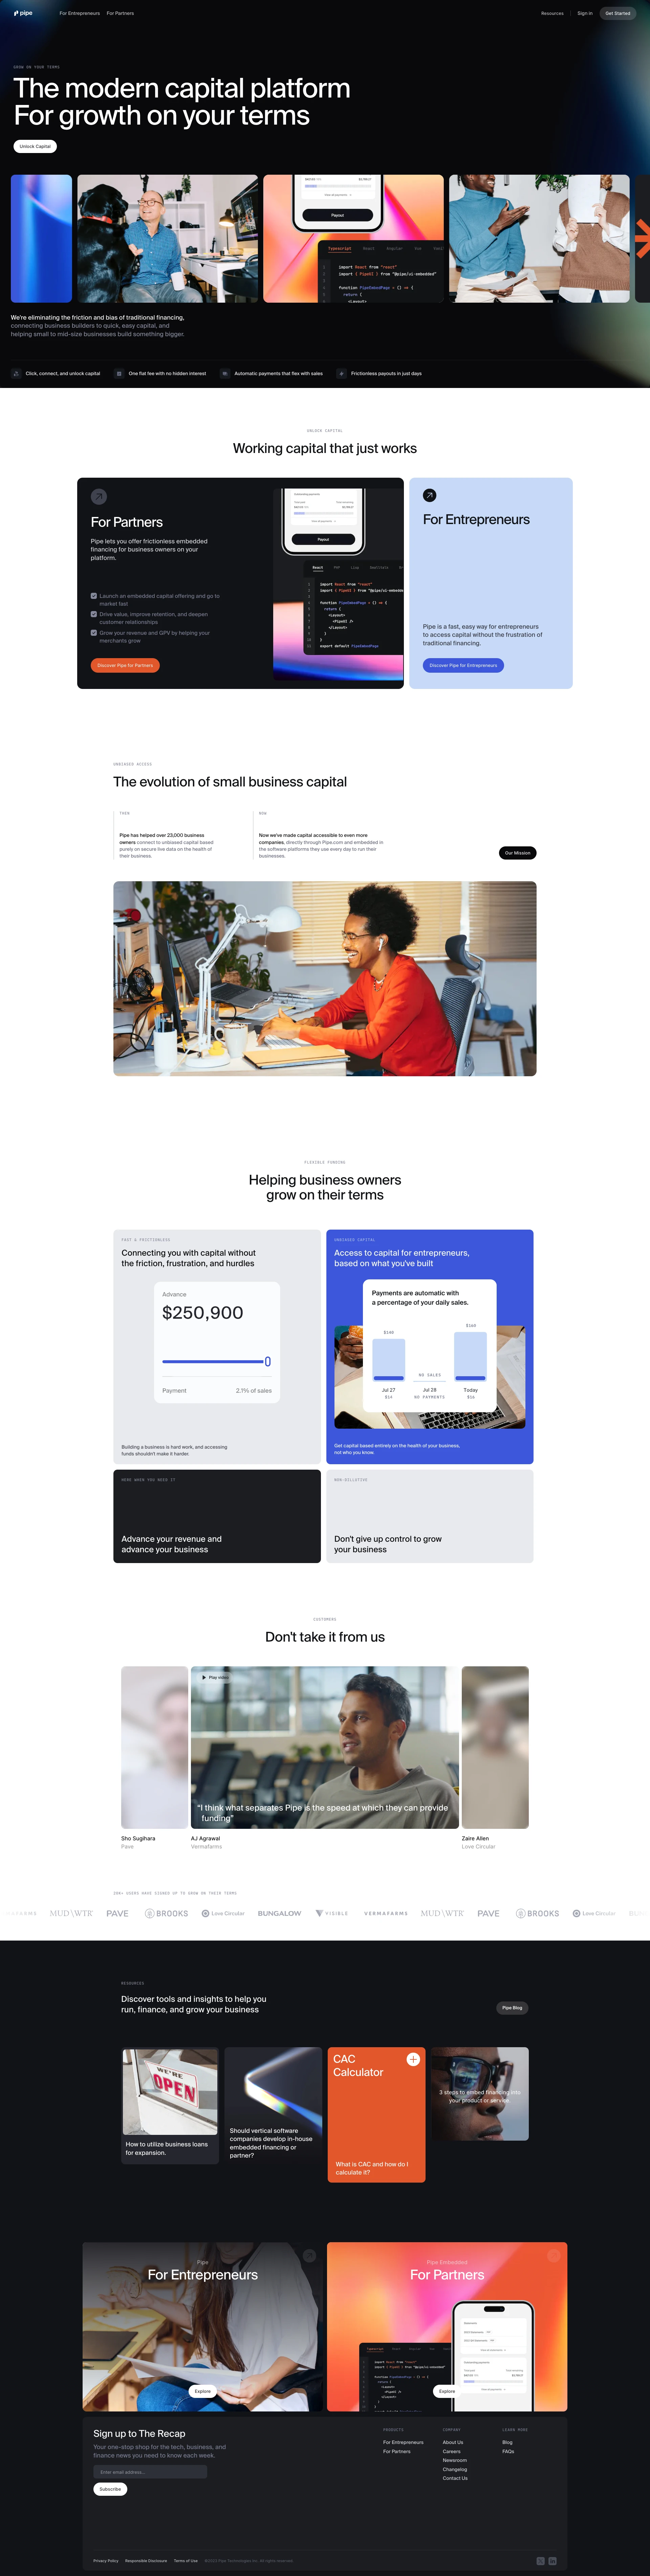 Pipe Landing Page Example: Grow on your terms with fast, flexible financing. Our modern capital platform offers embedded capital solutions and working capital for business owners.